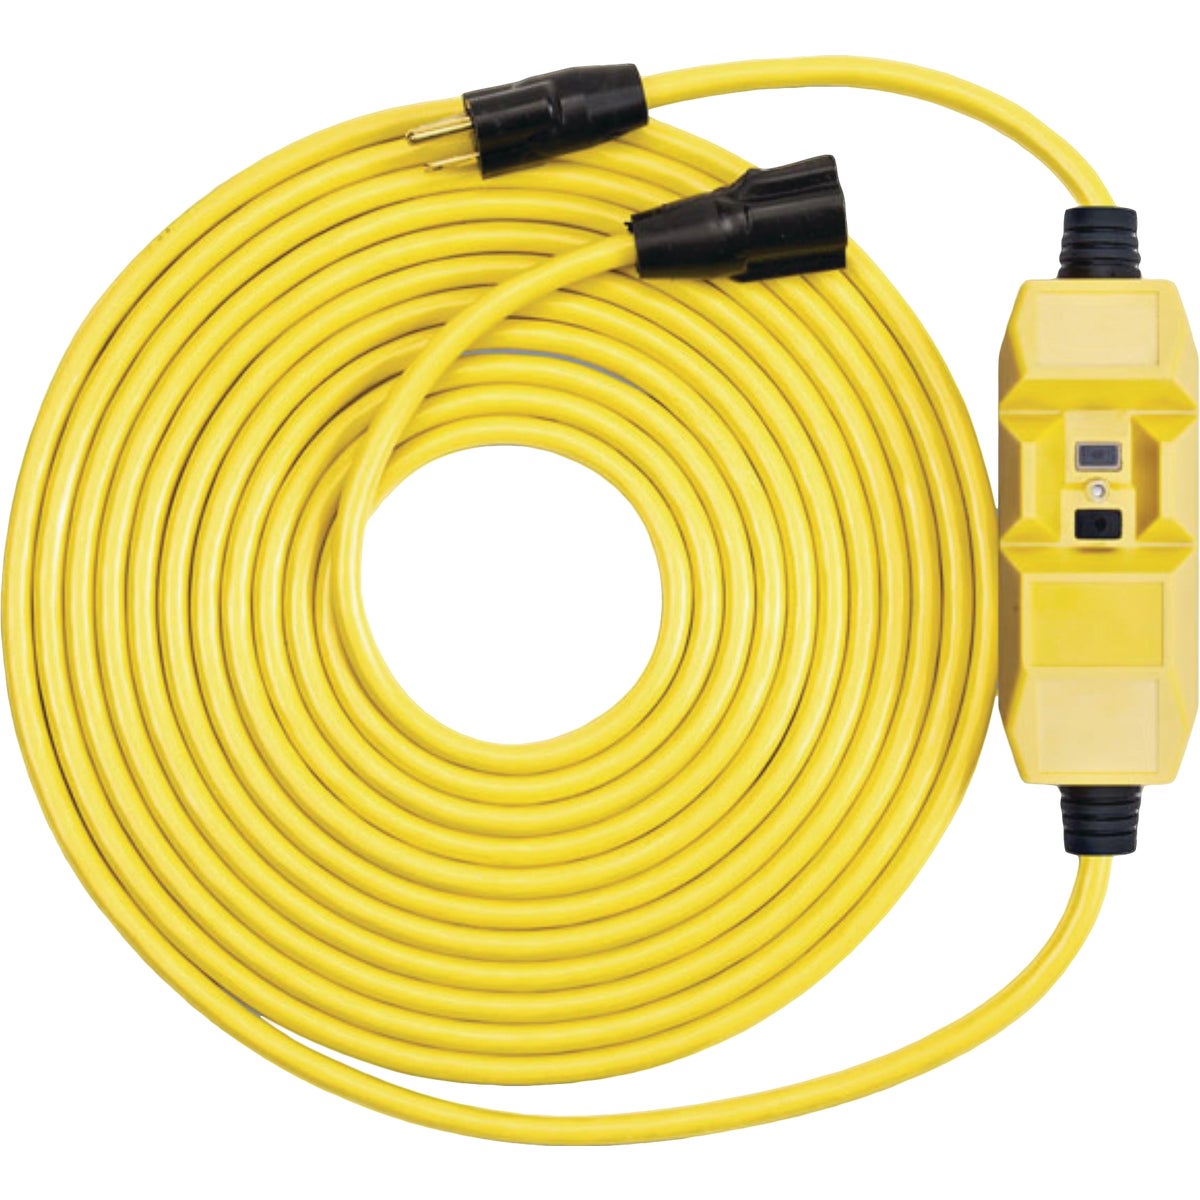 Southwire 50 Ft. 14/3 Heavy-Duty GFCI In-Line Extension Cord